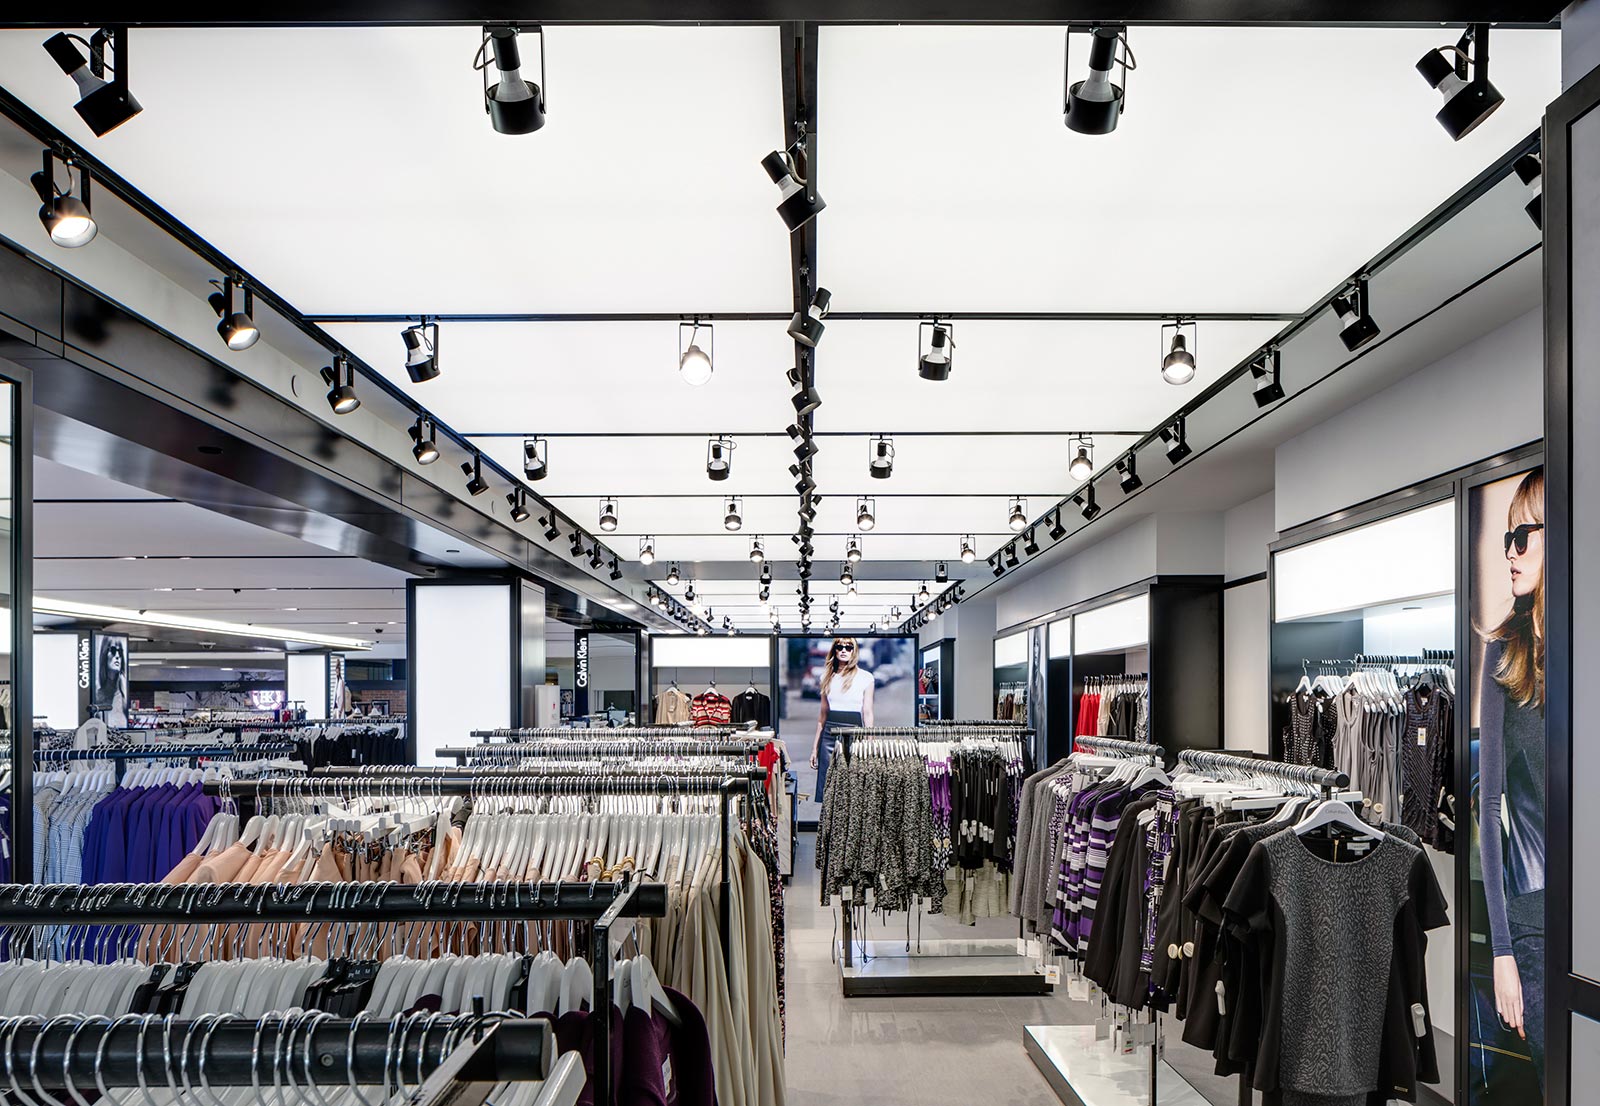 Gallery - Retail - Calvin Klein at Macy's | Cooledge Lighting